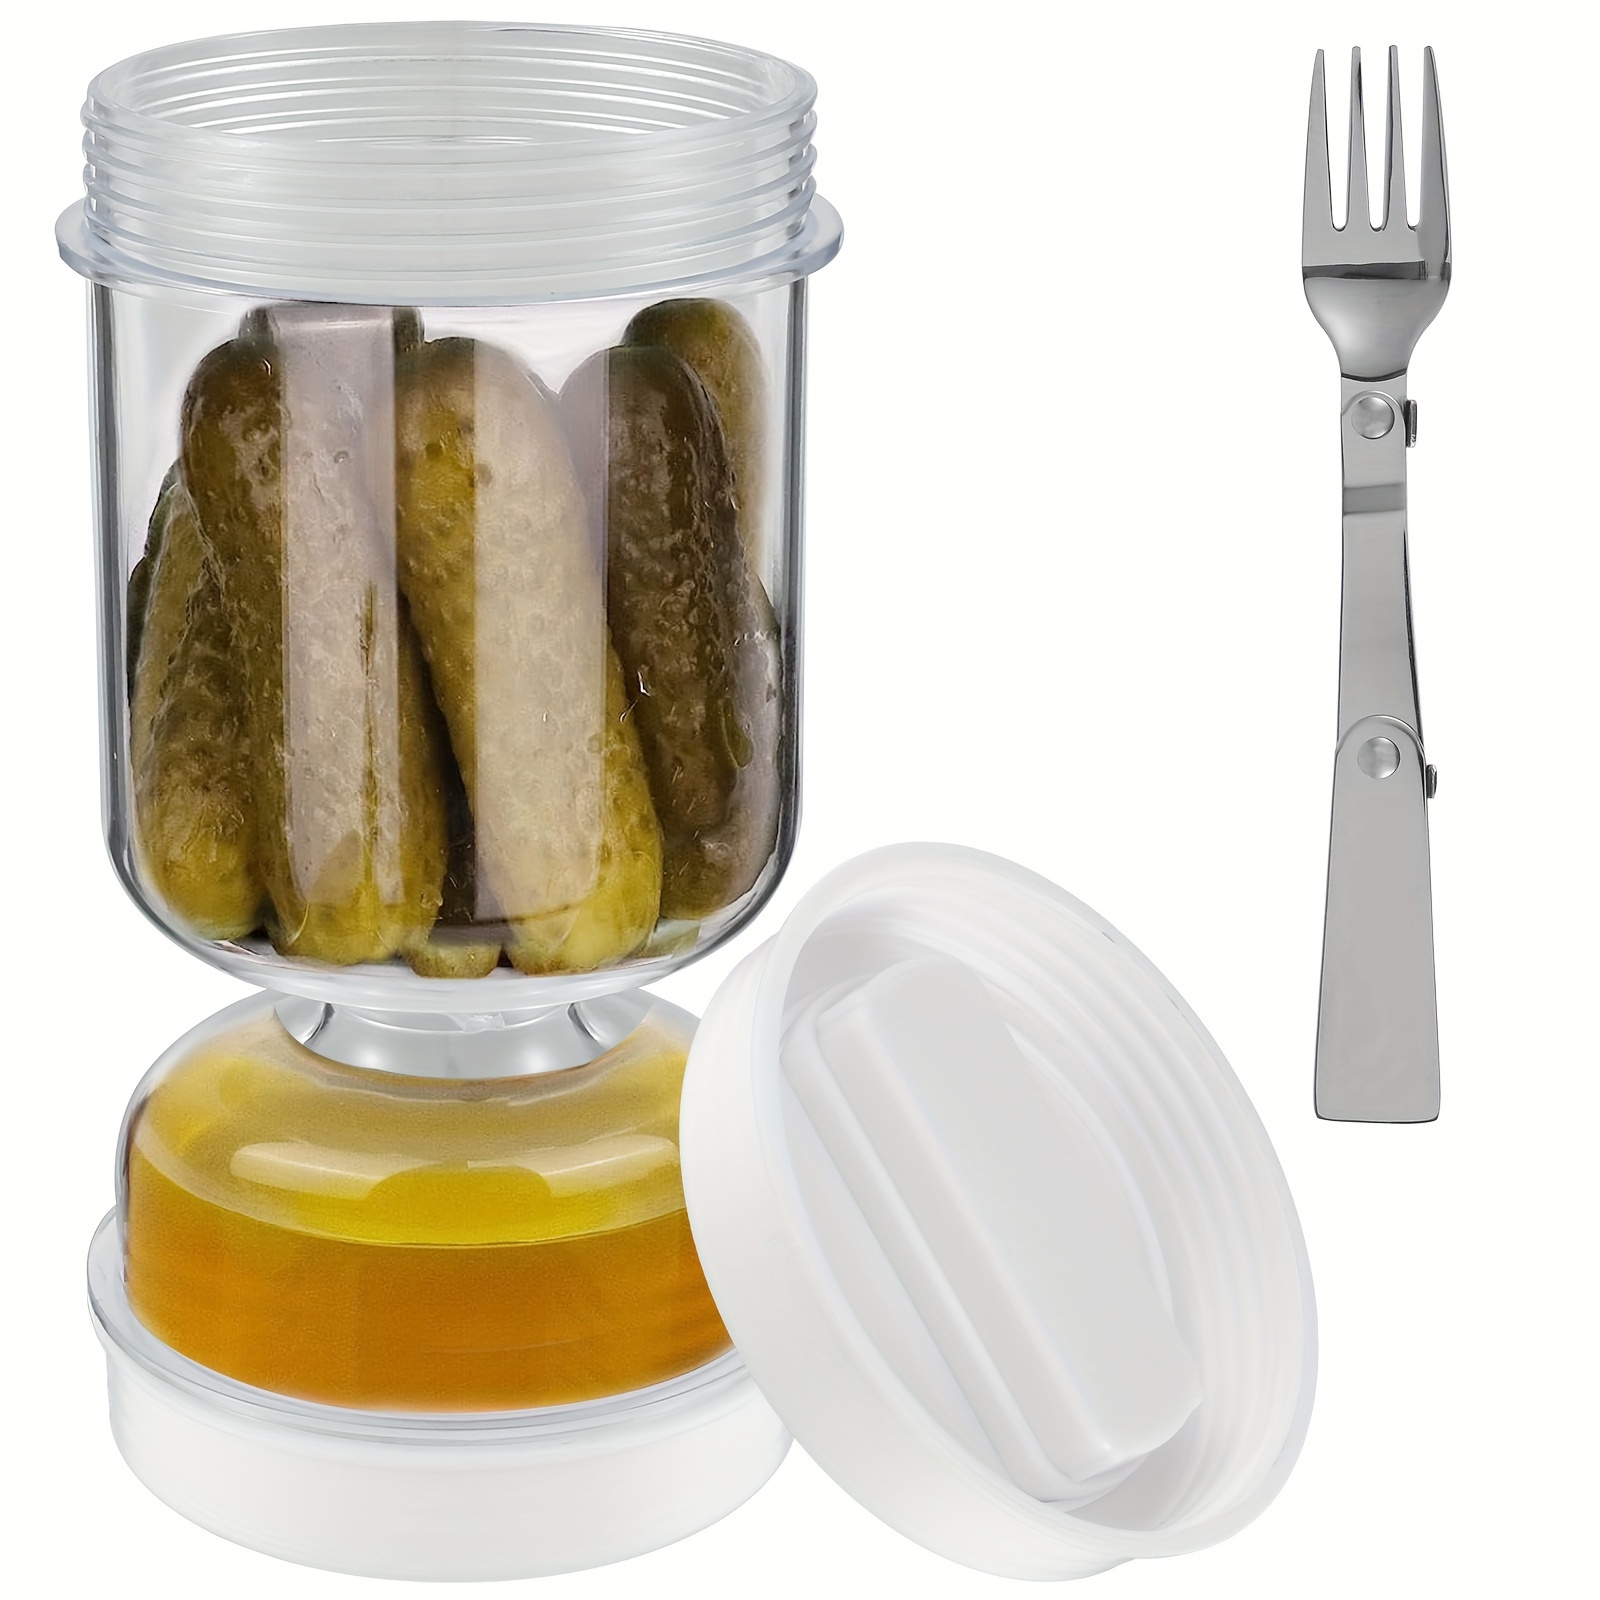 

multi-purpose" Versatile Acrylic Pickle Jar With Fork - Reusable, Round Kitchen Container For Pickles & Olives, Flip-top Lid, Hand Wash Only